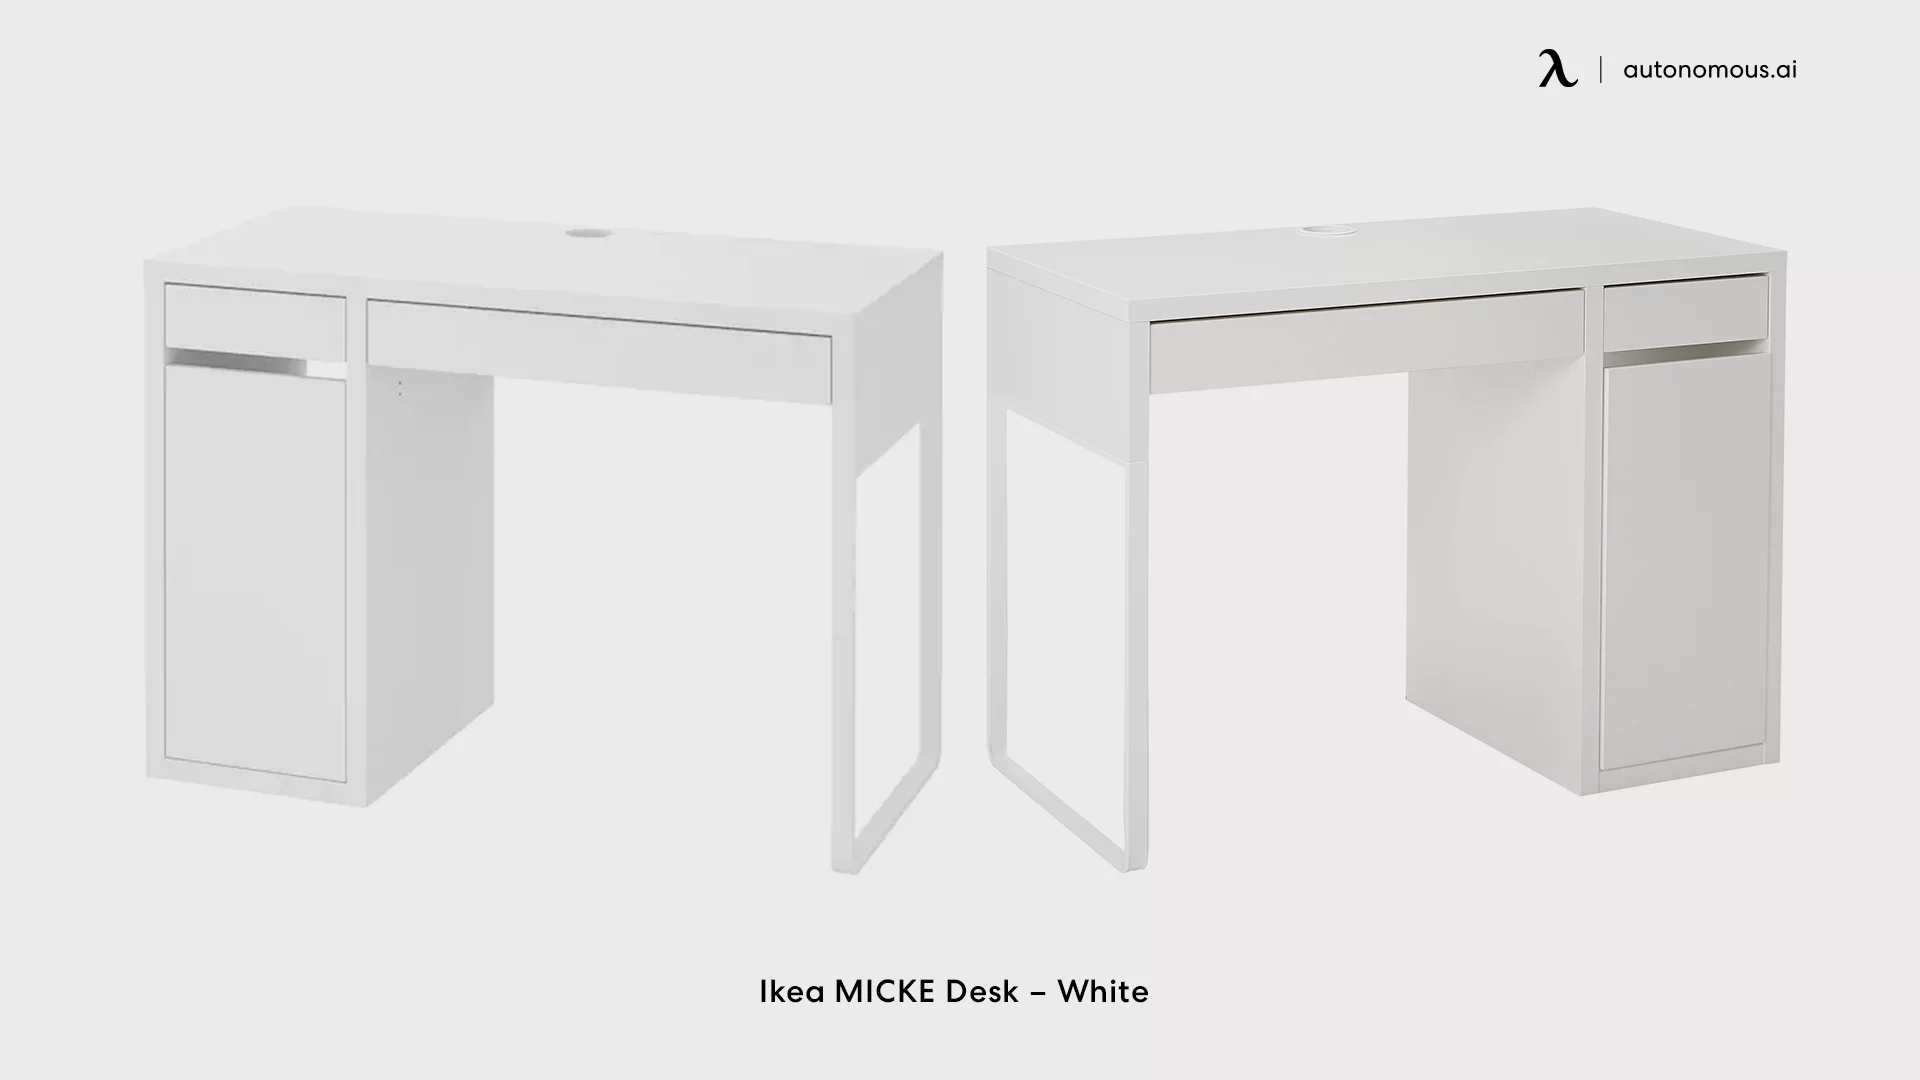 MICKE work from home desk